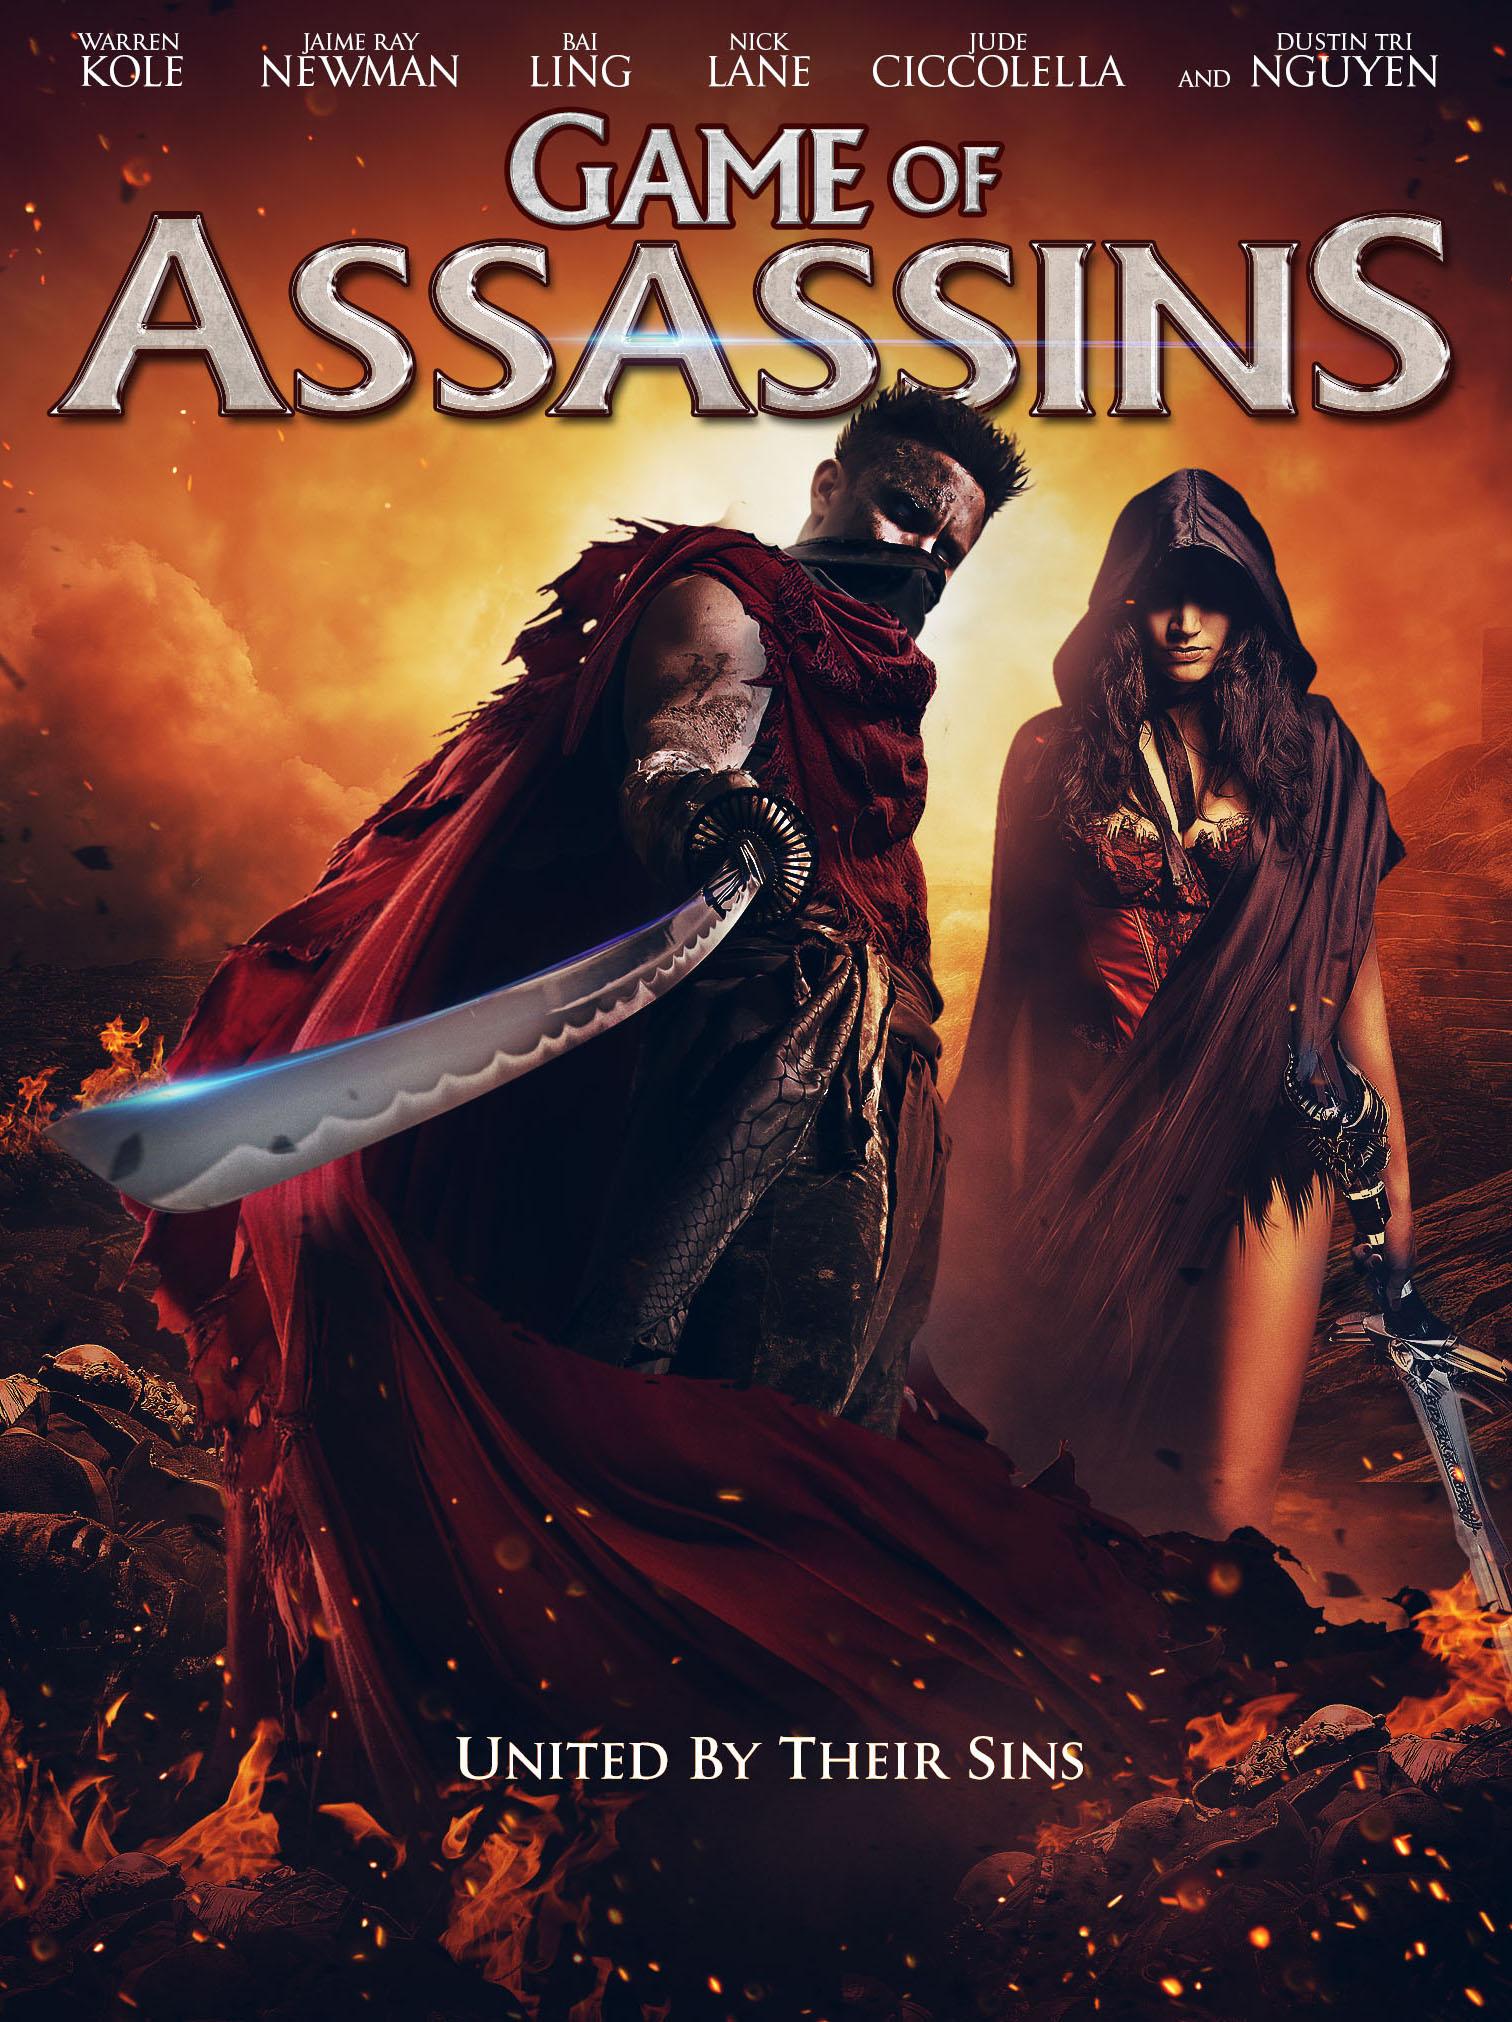 game-of-assassins-(2013)-large-cover.jpg